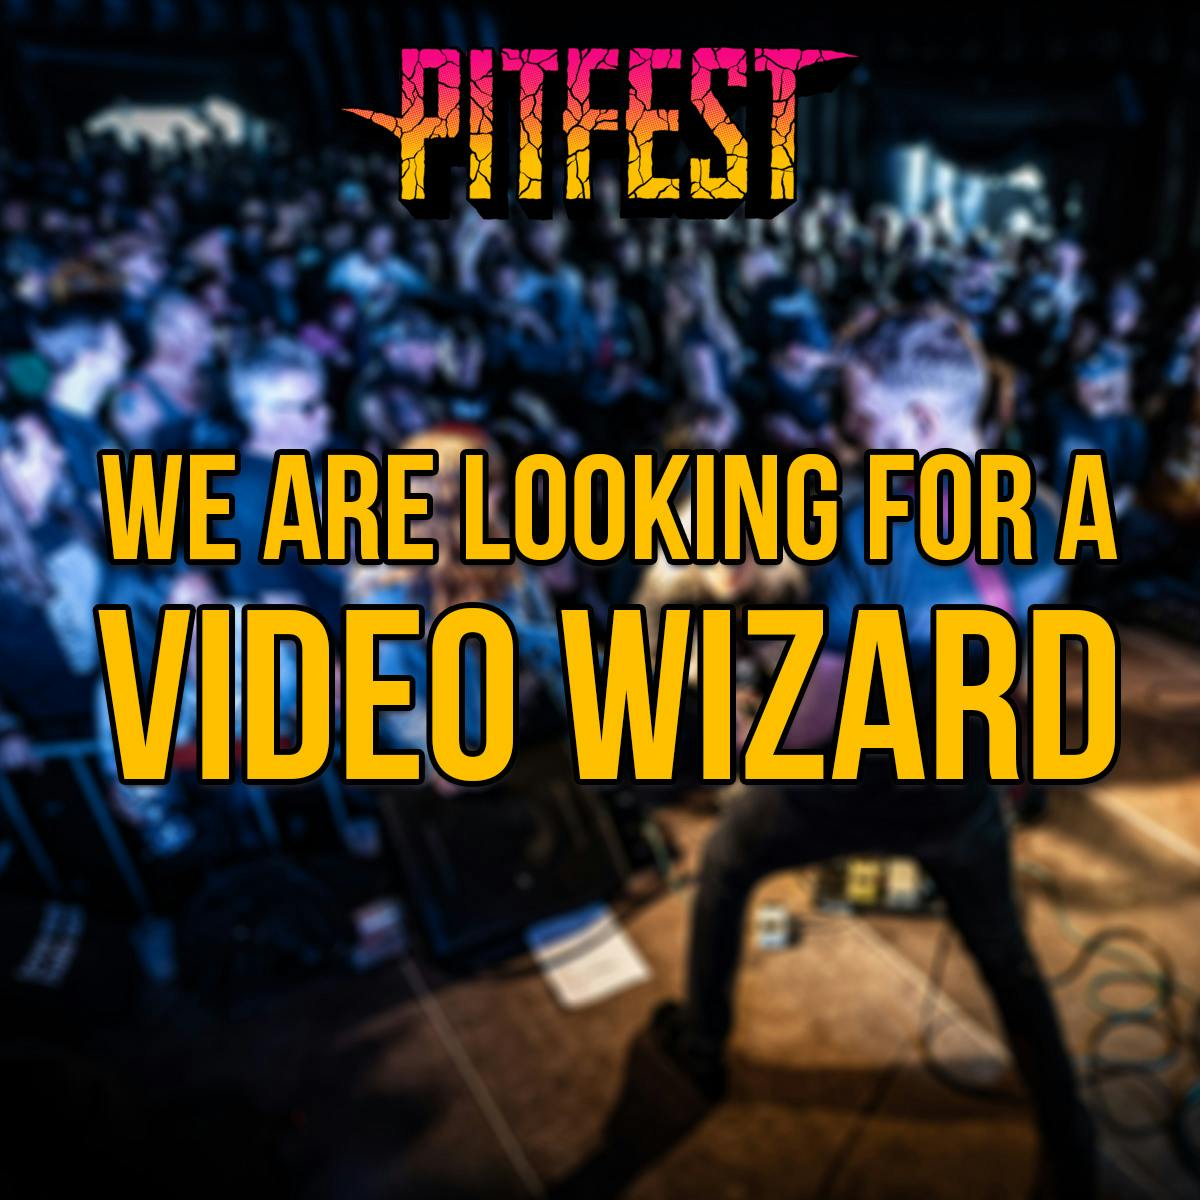 We are looking for a video wizard!